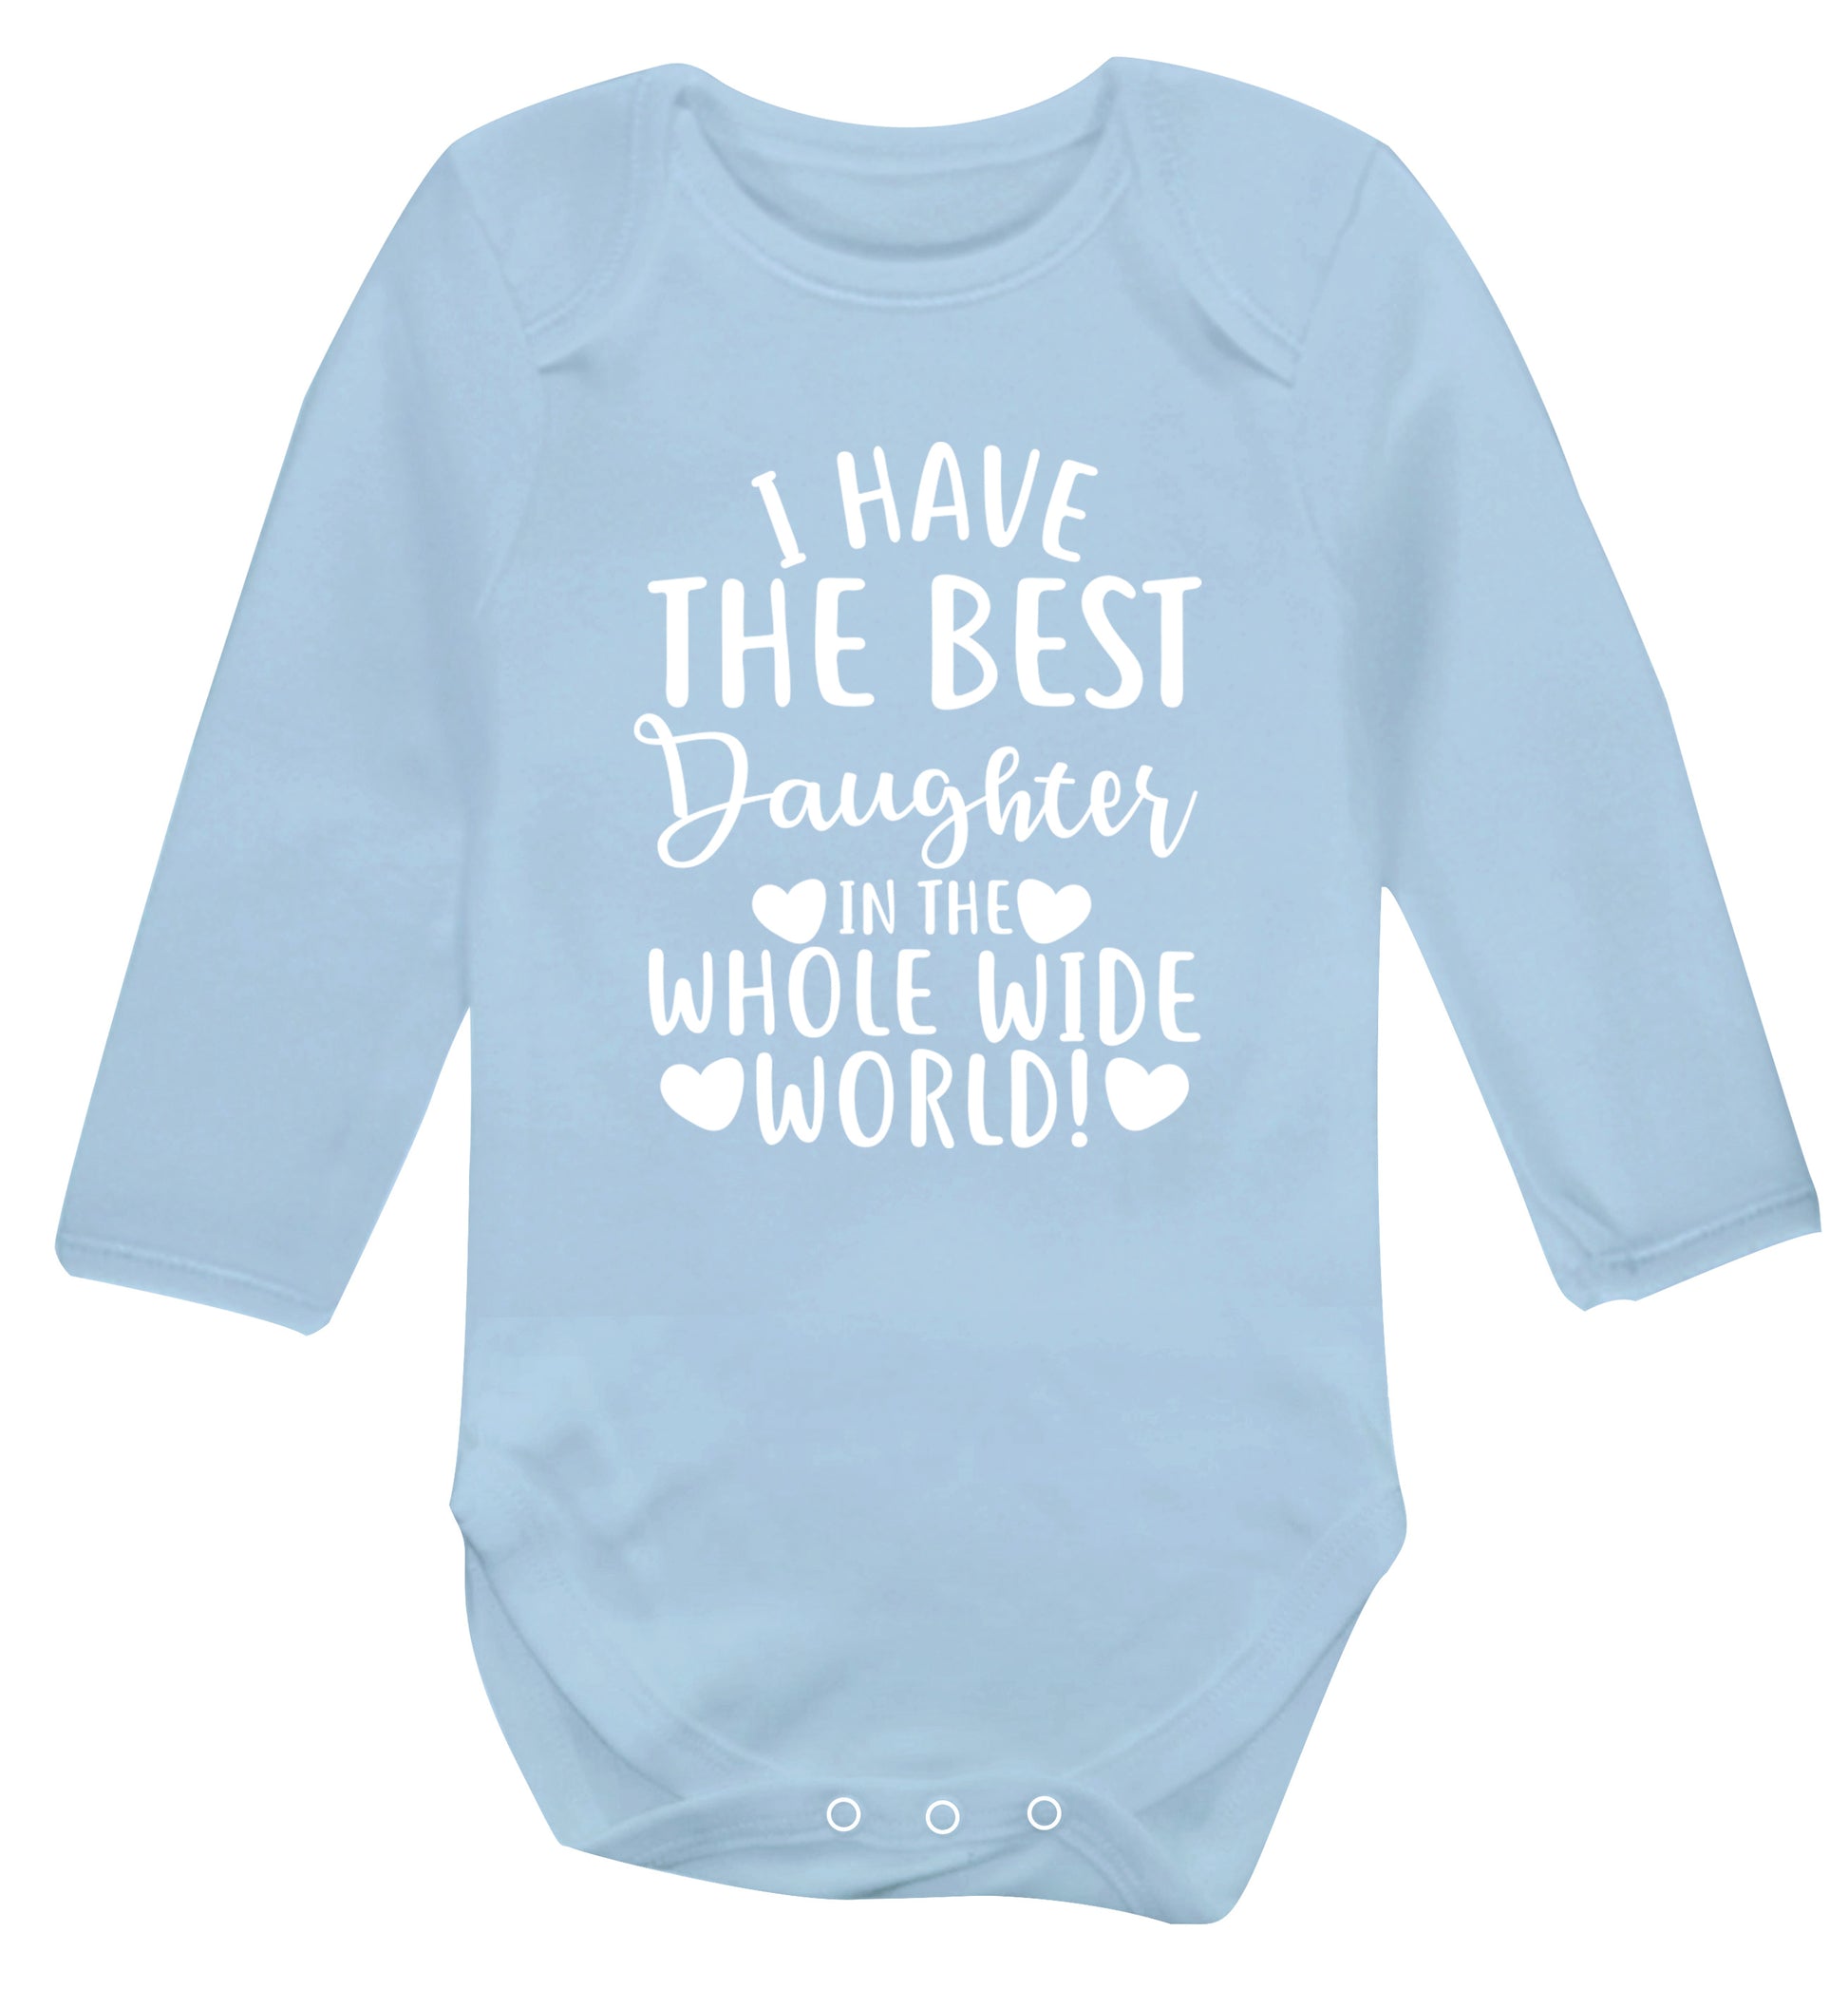 I have the best daughter in the whole wide world! Baby Vest long sleeved pale blue 6-12 months